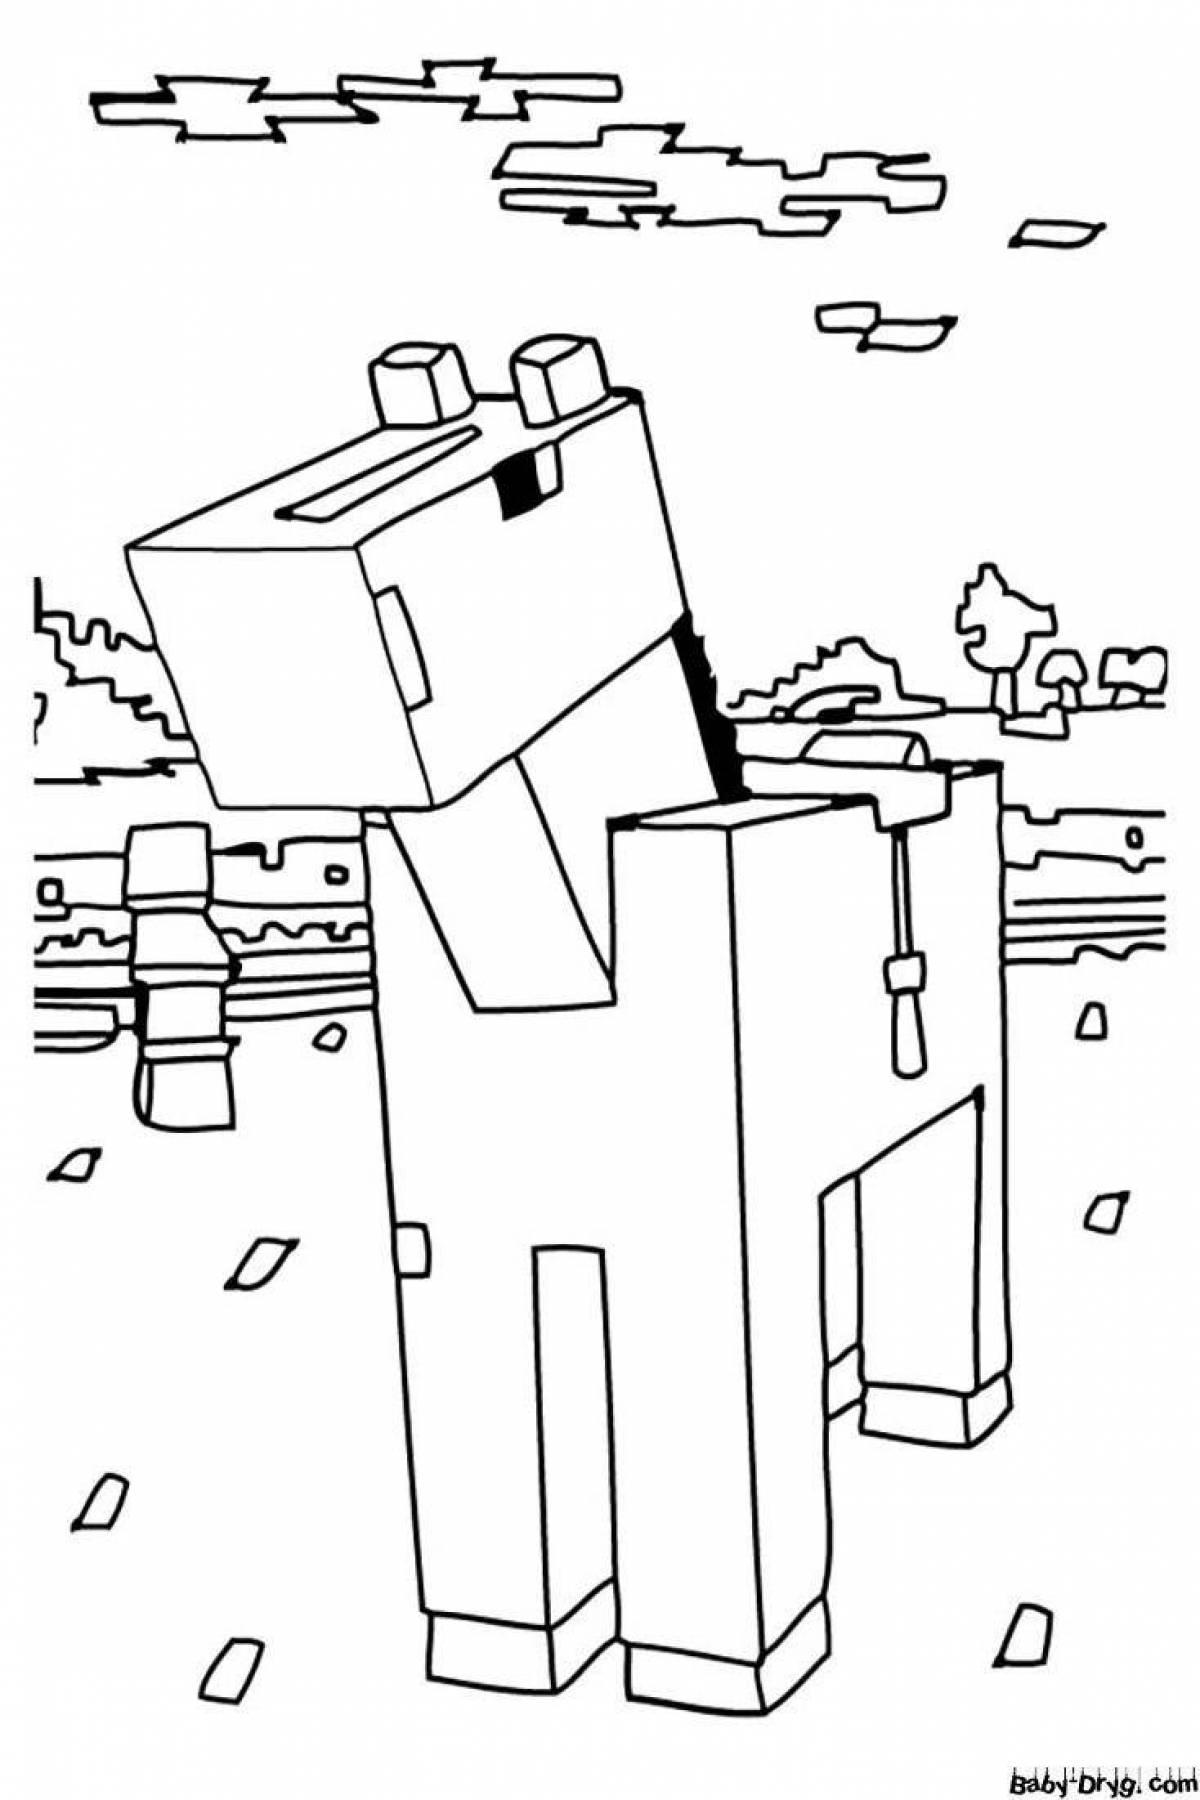 Cute minecraft cow coloring page